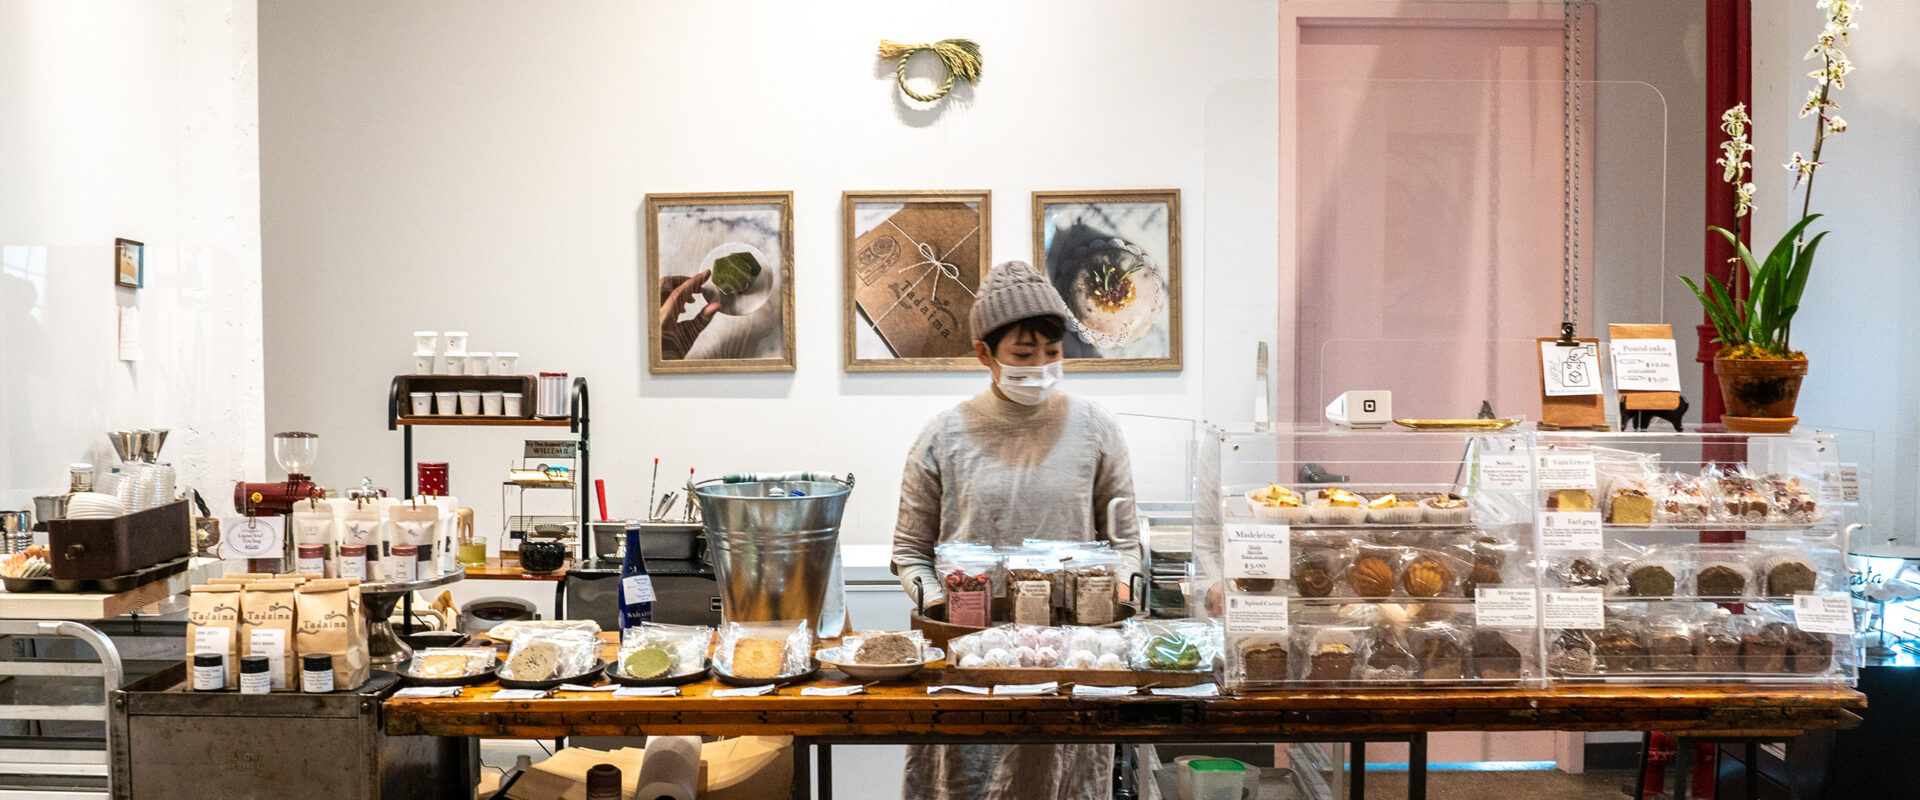 A person stands behind a counter with a display of baked goods